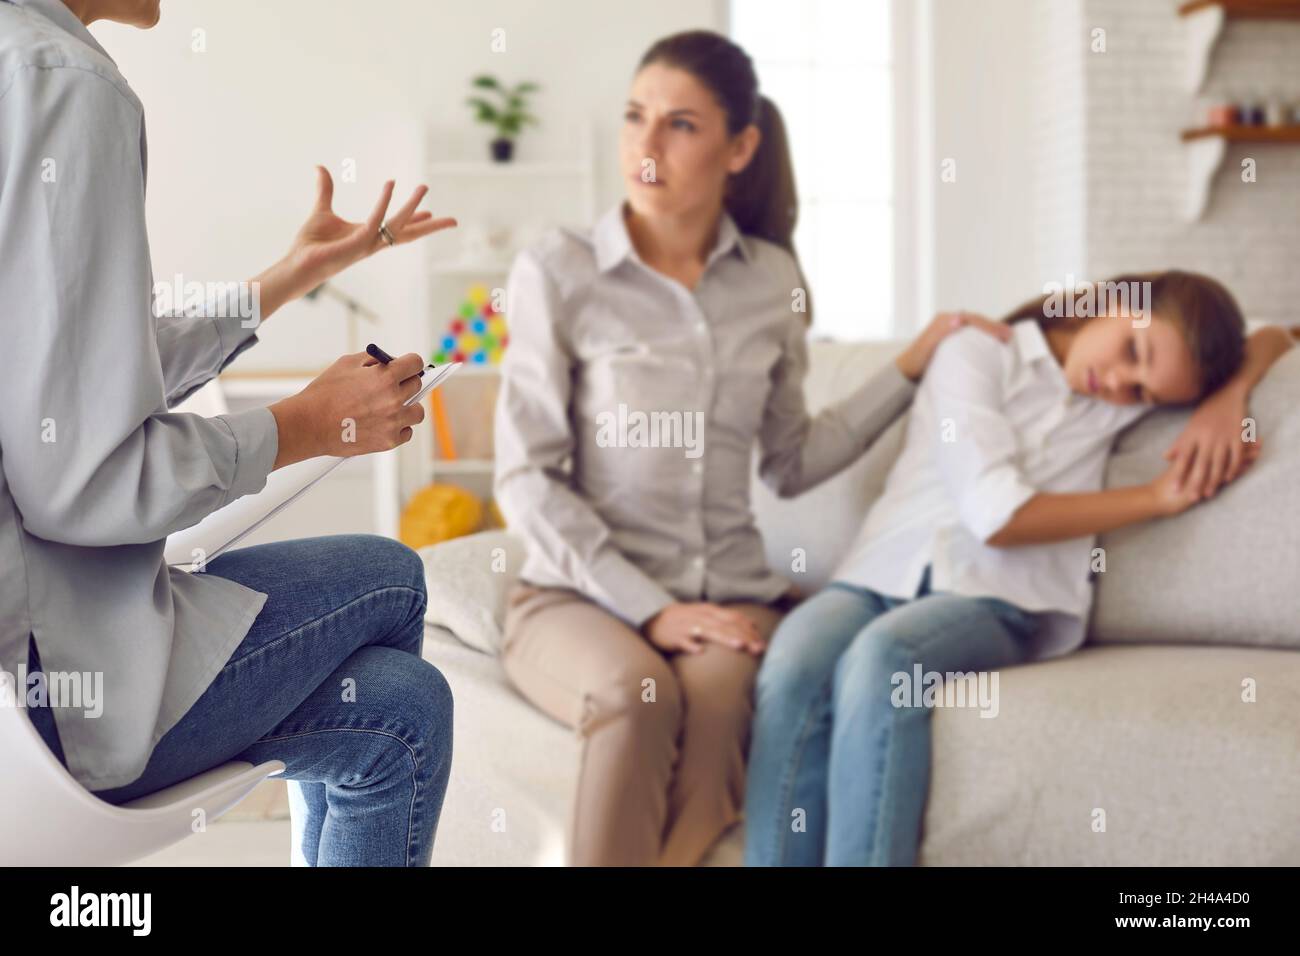 Therapist or psychologist providing professional guidance to mother with her child Stock Photo